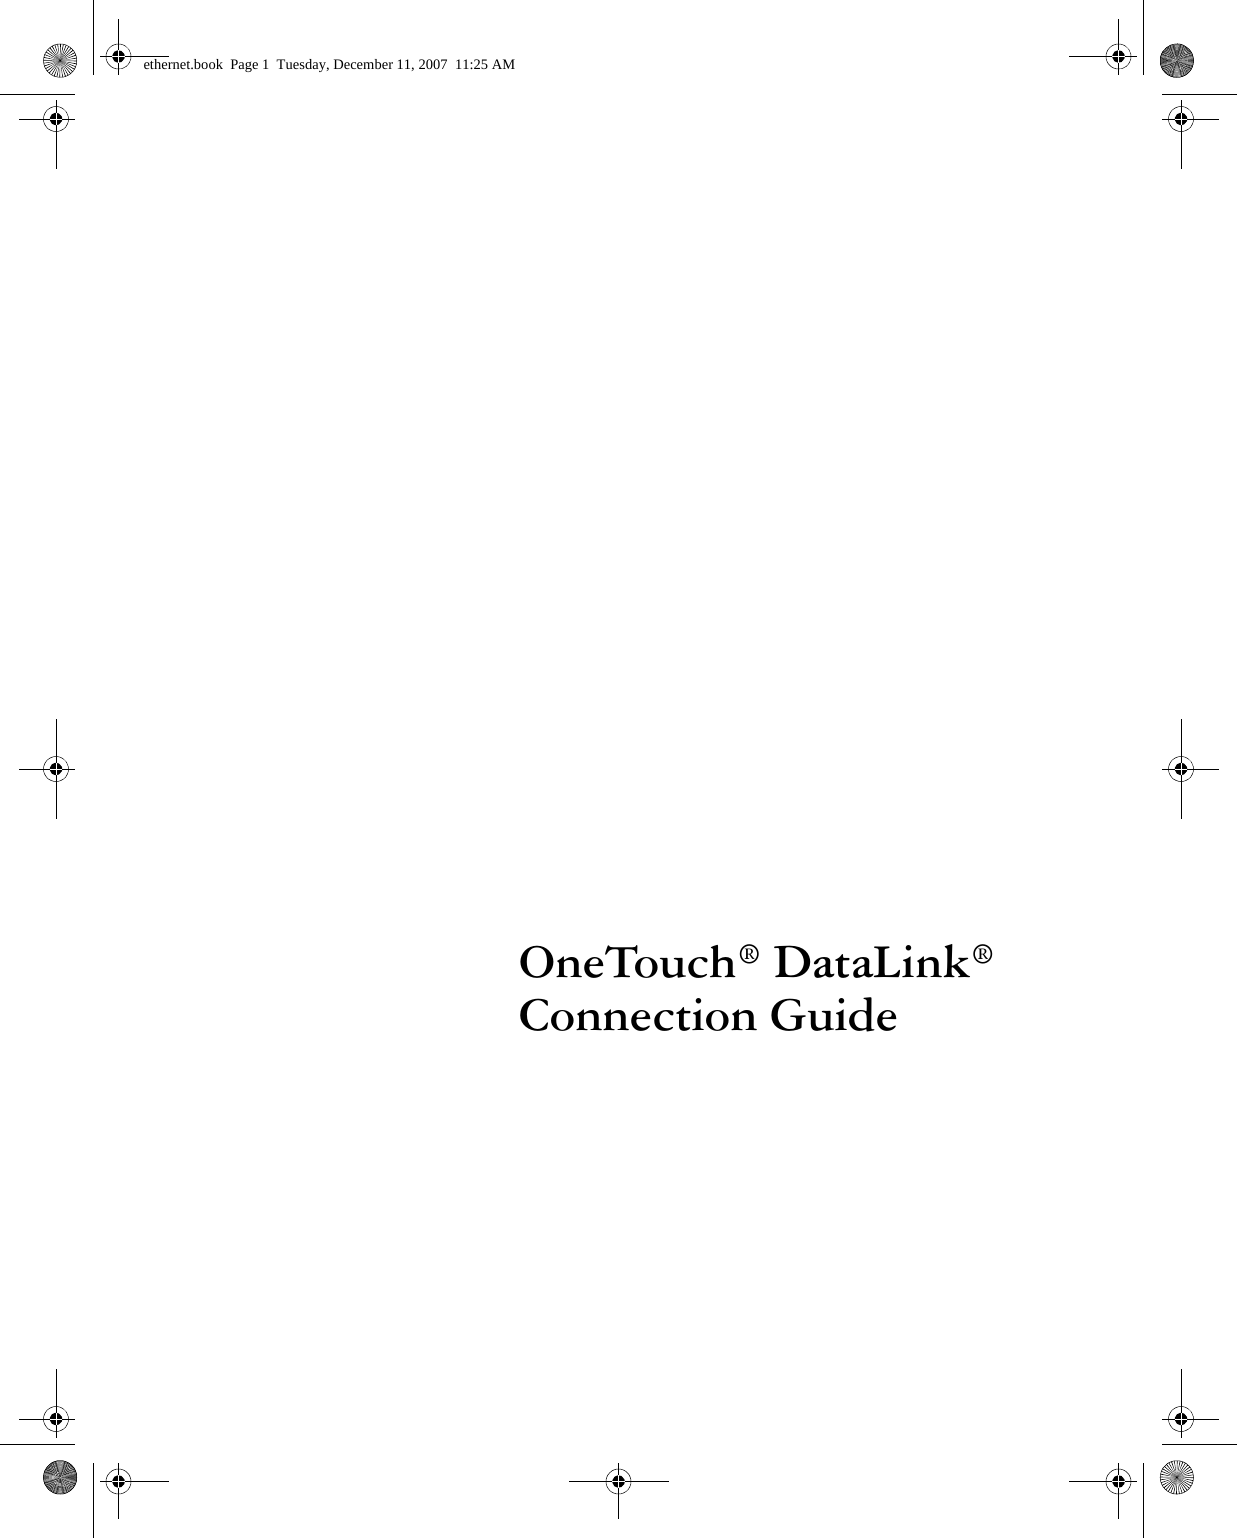 OneTouch® DataLink®Connection Guideethernet.book  Page 1  Tuesday, December 11, 2007  11:25 AM